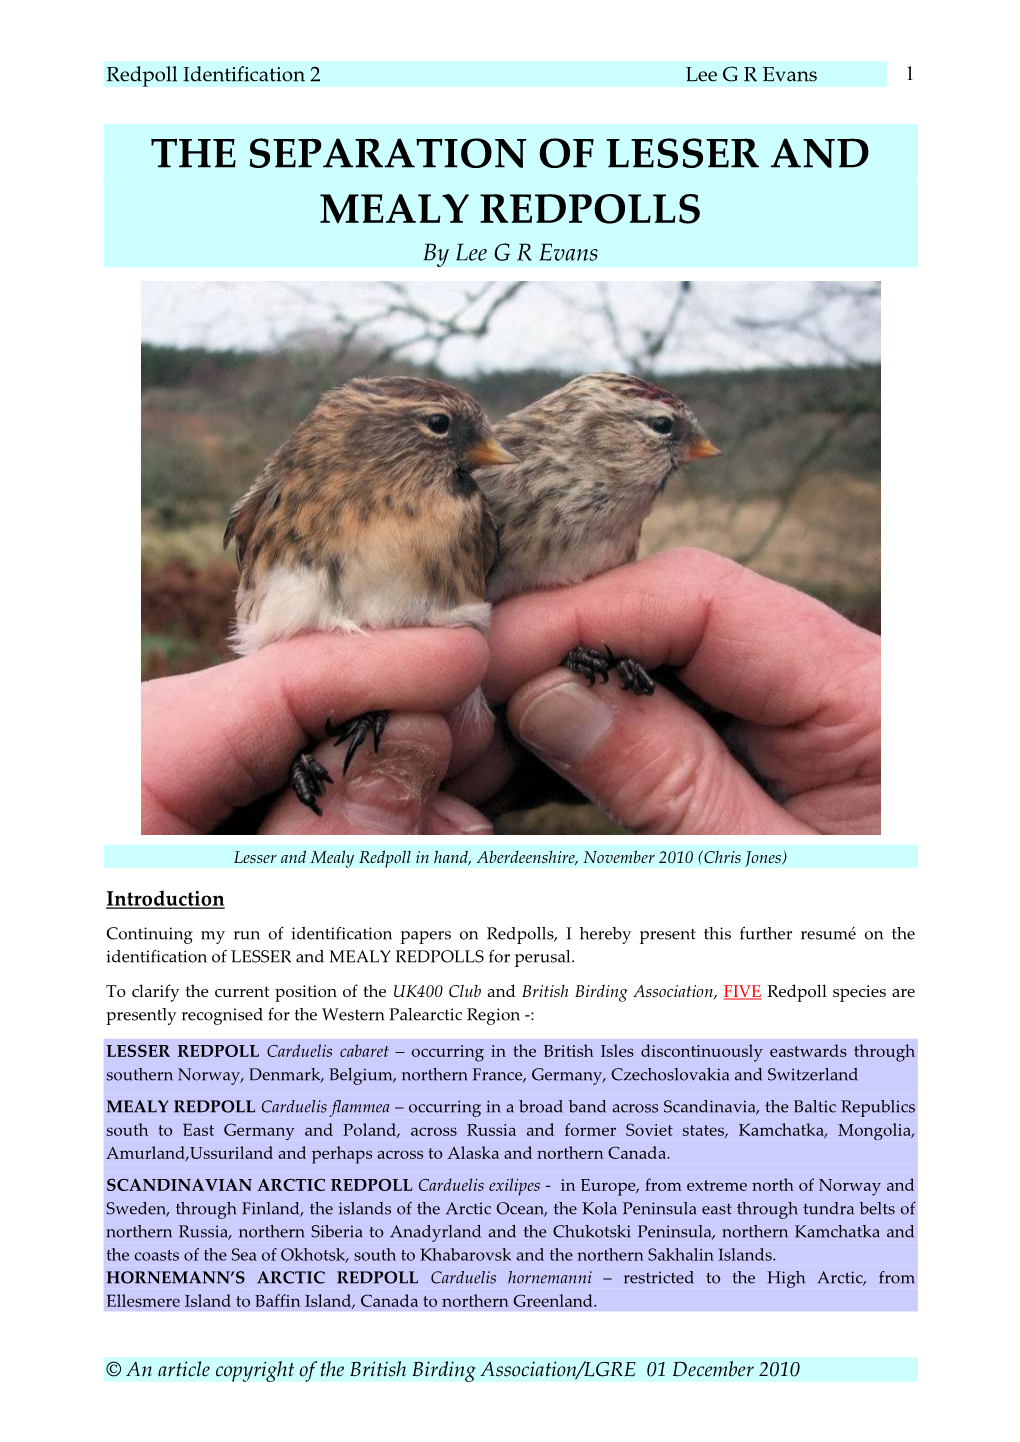 Identification of LESSER and MEALY REDPOLLS for Perusal